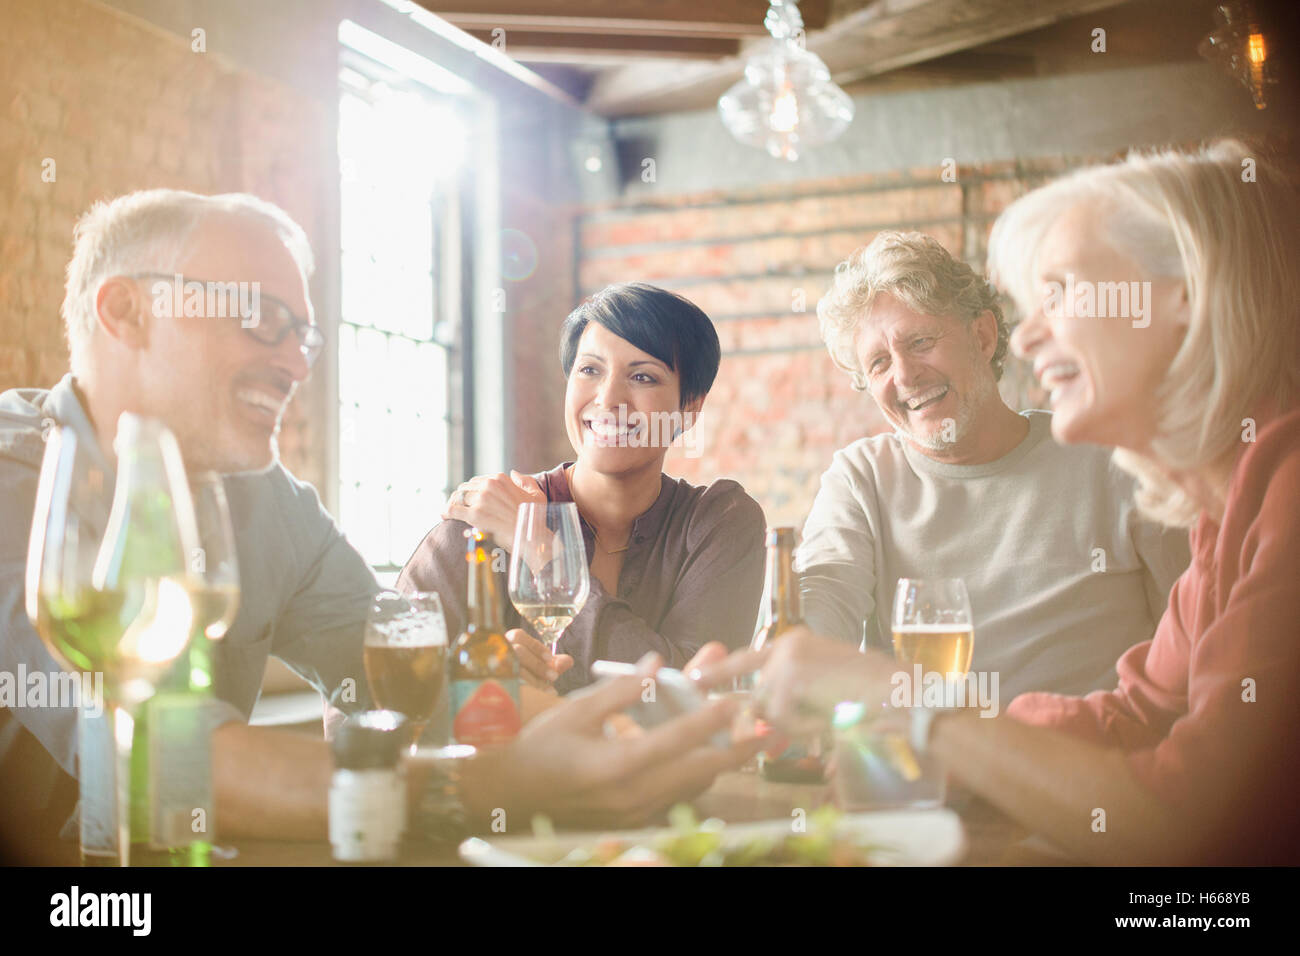 Couples dining and using cell phone at restaurant table Stock Photo